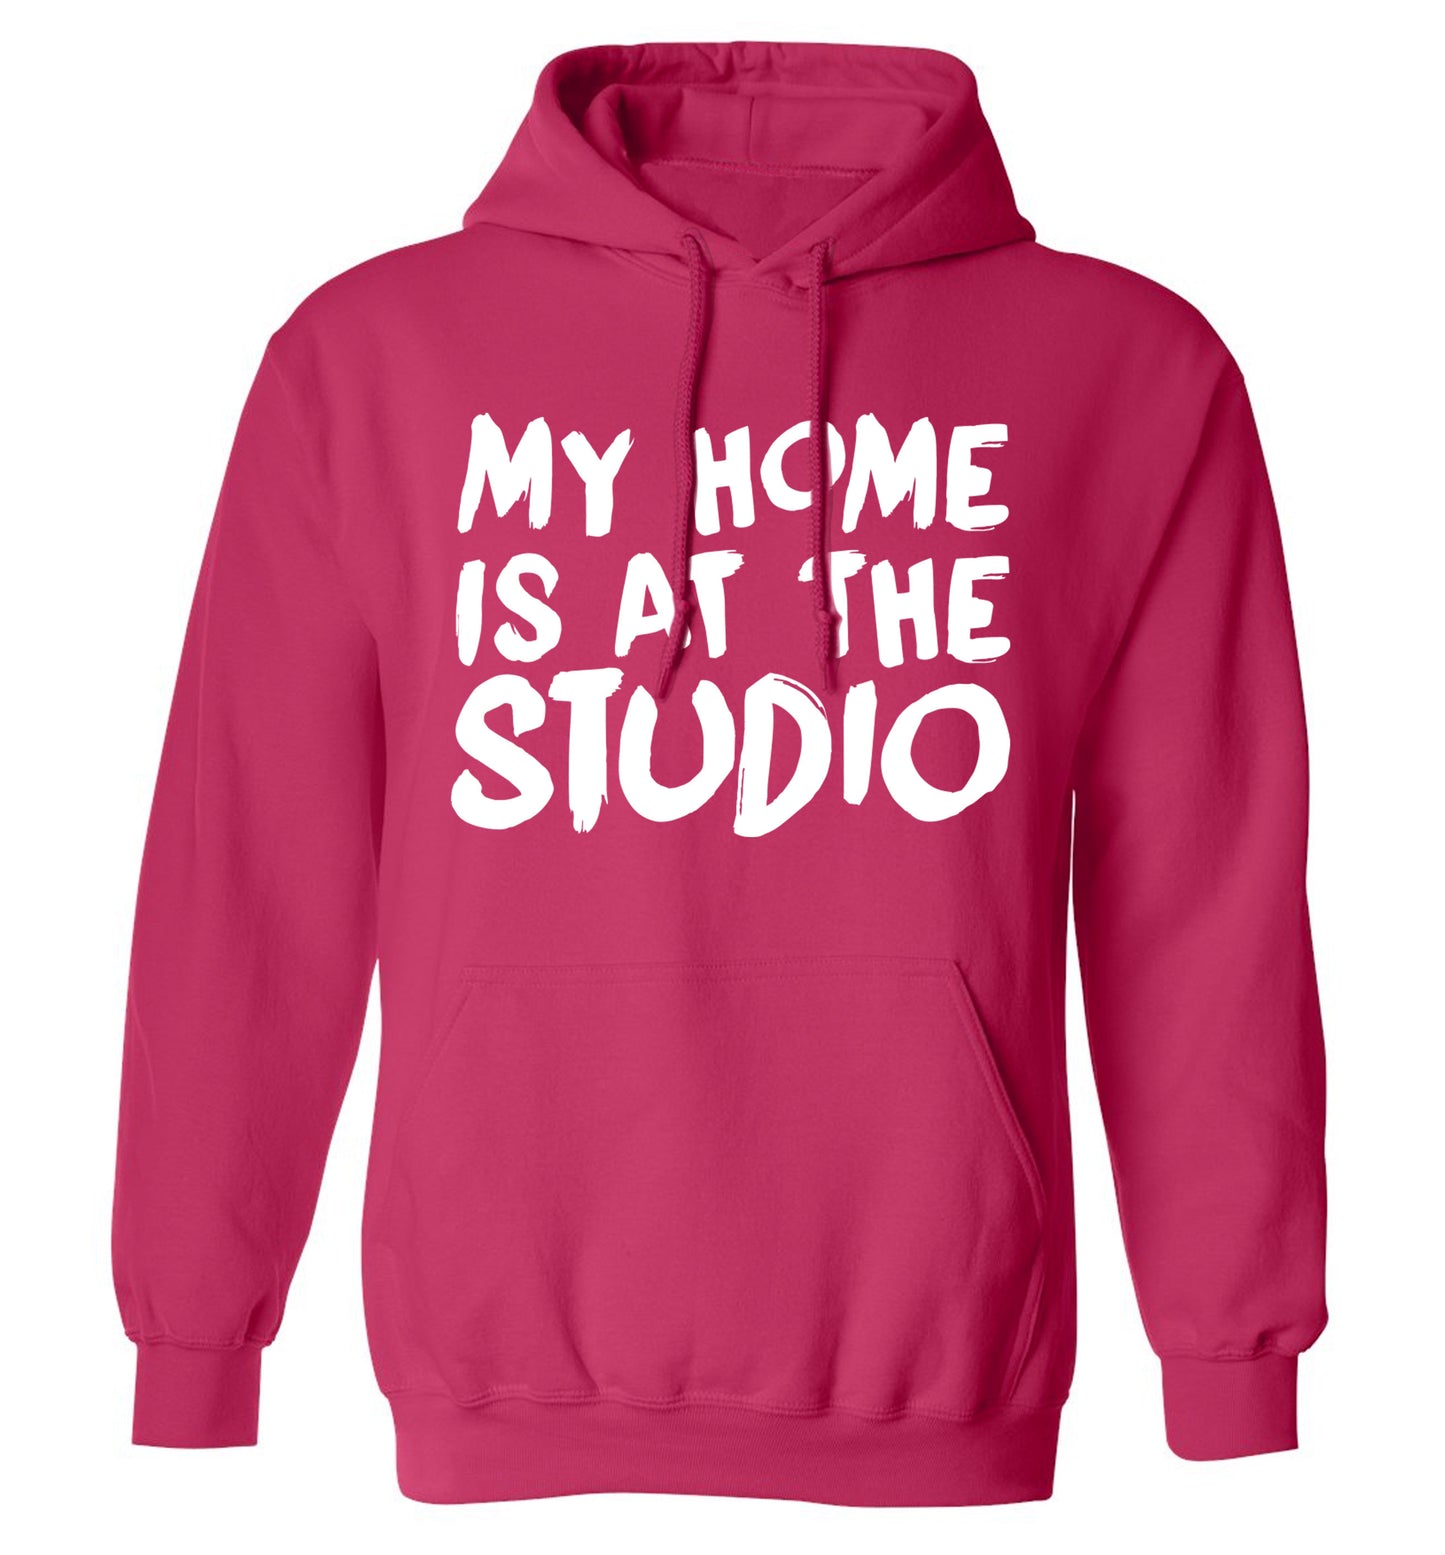 My home is at the studio adults unisex pink hoodie 2XL